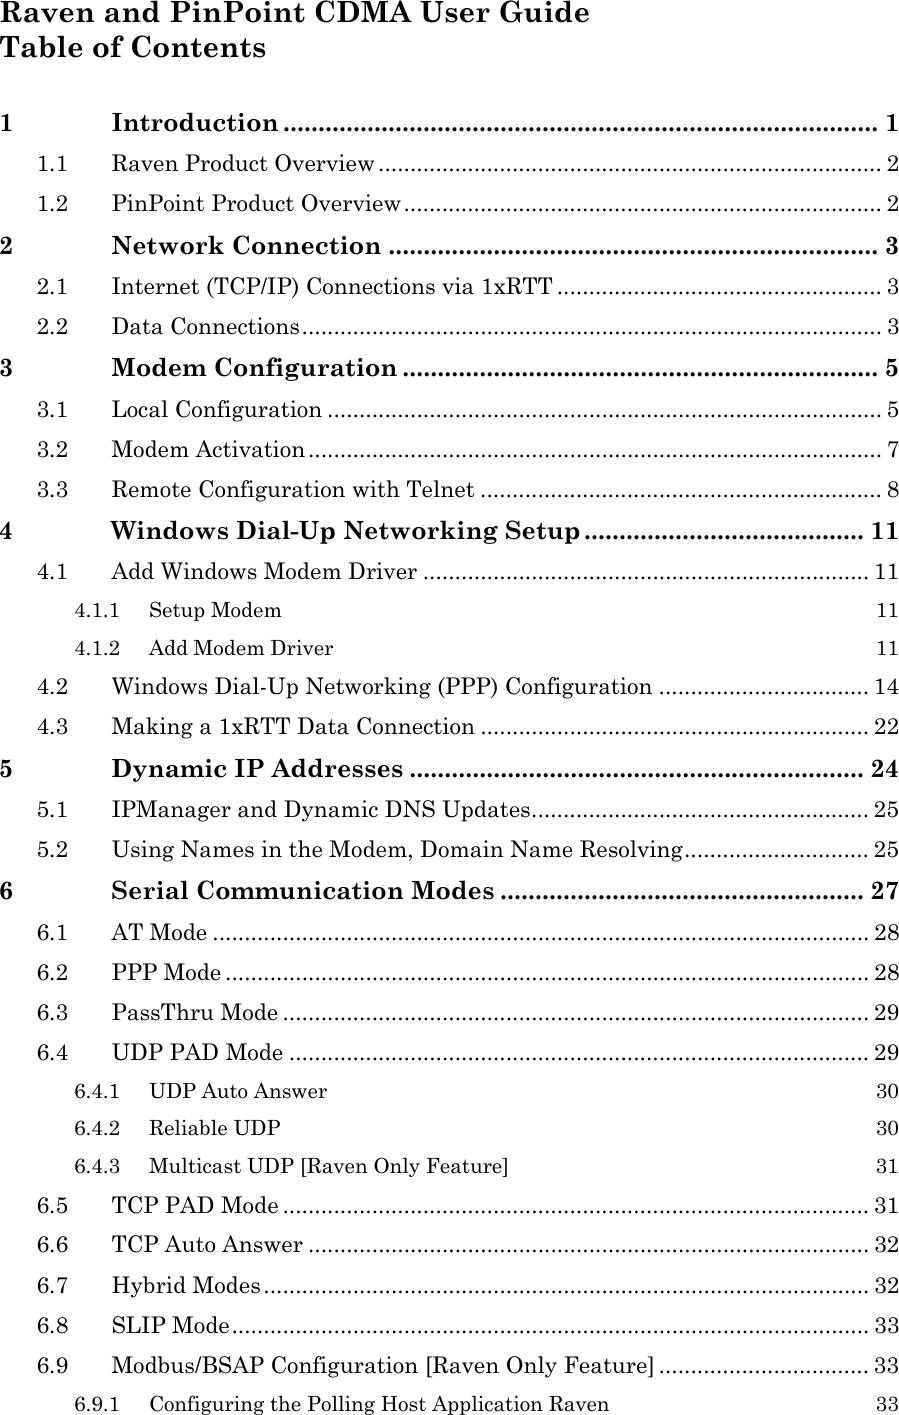  Raven and PinPoint CDMA User Guide Table of Contents  1 Introduction ..................................................................................... 1 1.1 Raven Product Overview ............................................................................... 2 1.2 PinPoint Product Overview........................................................................... 2 2 Network Connection ...................................................................... 3 2.1 Internet (TCP/IP) Connections via 1xRTT ................................................... 3 2.2 Data Connections........................................................................................... 3 3 Modem Configuration .................................................................... 5 3.1 Local Configuration ....................................................................................... 5 3.2 Modem Activation.......................................................................................... 7 3.3 Remote Configuration with Telnet ............................................................... 8 4 Windows Dial-Up Networking Setup ........................................ 11 4.1 Add Windows Modem Driver ...................................................................... 11 4.1.1 Setup Modem  11 4.1.2 Add Modem Driver  11 4.2 Windows Dial-Up Networking (PPP) Configuration ................................. 14 4.3 Making a 1xRTT Data Connection ............................................................. 22 5 Dynamic IP Addresses ................................................................. 24 5.1 IPManager and Dynamic DNS Updates..................................................... 25 5.2 Using Names in the Modem, Domain Name Resolving............................. 25 6 Serial Communication Modes .................................................... 27 6.1 AT Mode ....................................................................................................... 28 6.2 PPP Mode ..................................................................................................... 28 6.3 PassThru Mode ............................................................................................ 29 6.4 UDP PAD Mode ........................................................................................... 29 6.4.1 UDP Auto Answer  30 6.4.2 Reliable UDP  30 6.4.3 Multicast UDP [Raven Only Feature]  31 6.5 TCP PAD Mode ............................................................................................ 31 6.6 TCP Auto Answer ........................................................................................ 32 6.7 Hybrid Modes............................................................................................... 32 6.8 SLIP Mode.................................................................................................... 33 6.9 Modbus/BSAP Configuration [Raven Only Feature] ................................. 33 6.9.1 Configuring the Polling Host Application Raven  33 